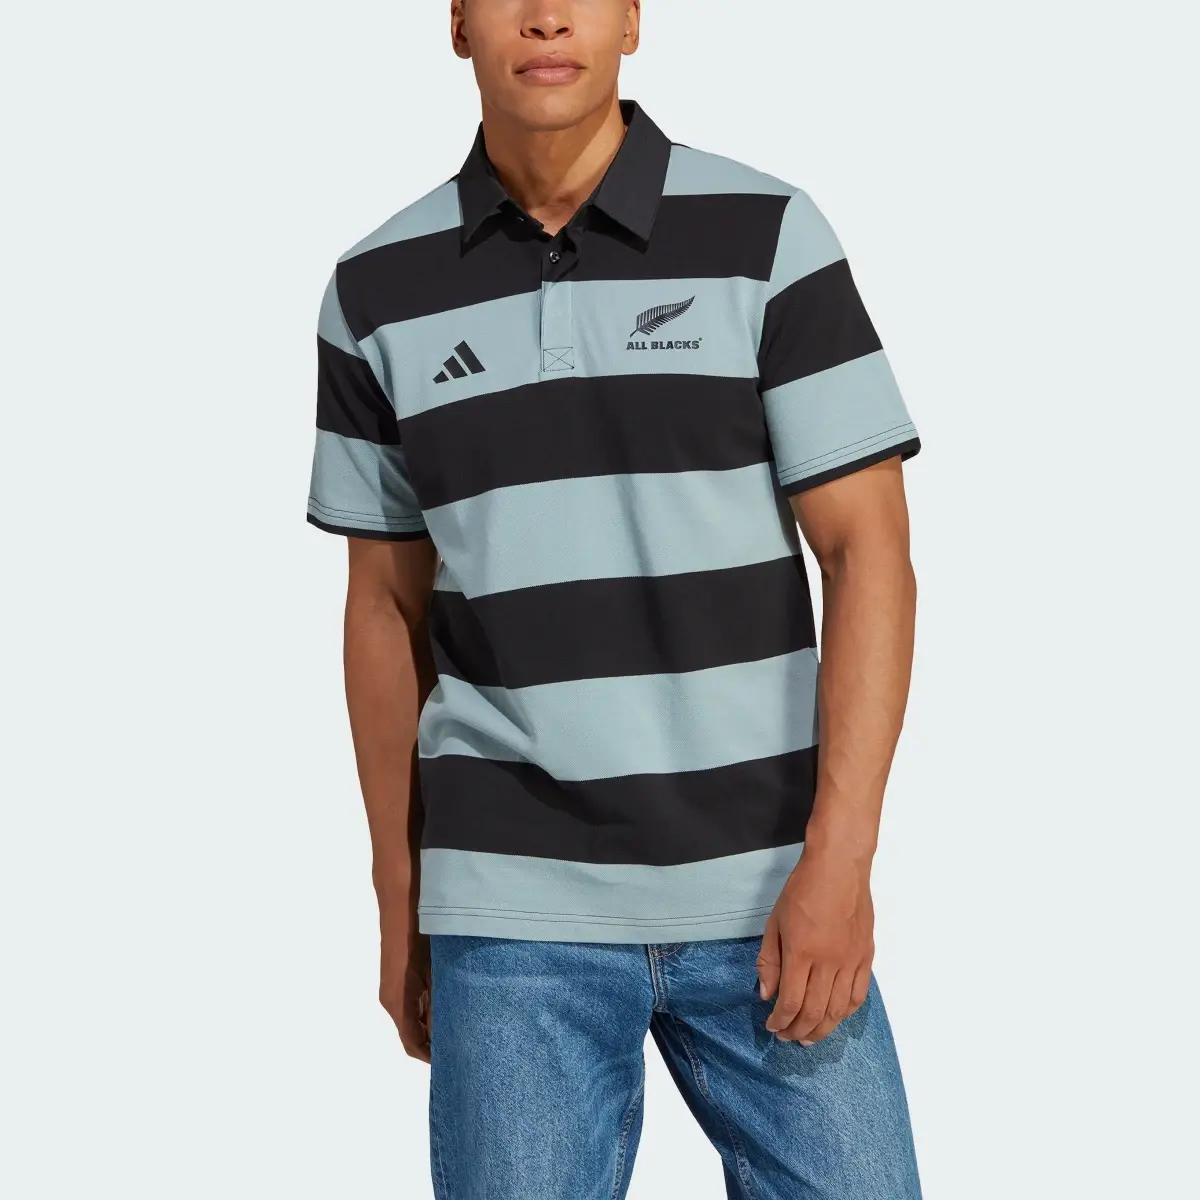 Adidas All Blacks Rugby Supporters Polo Shirt. 1